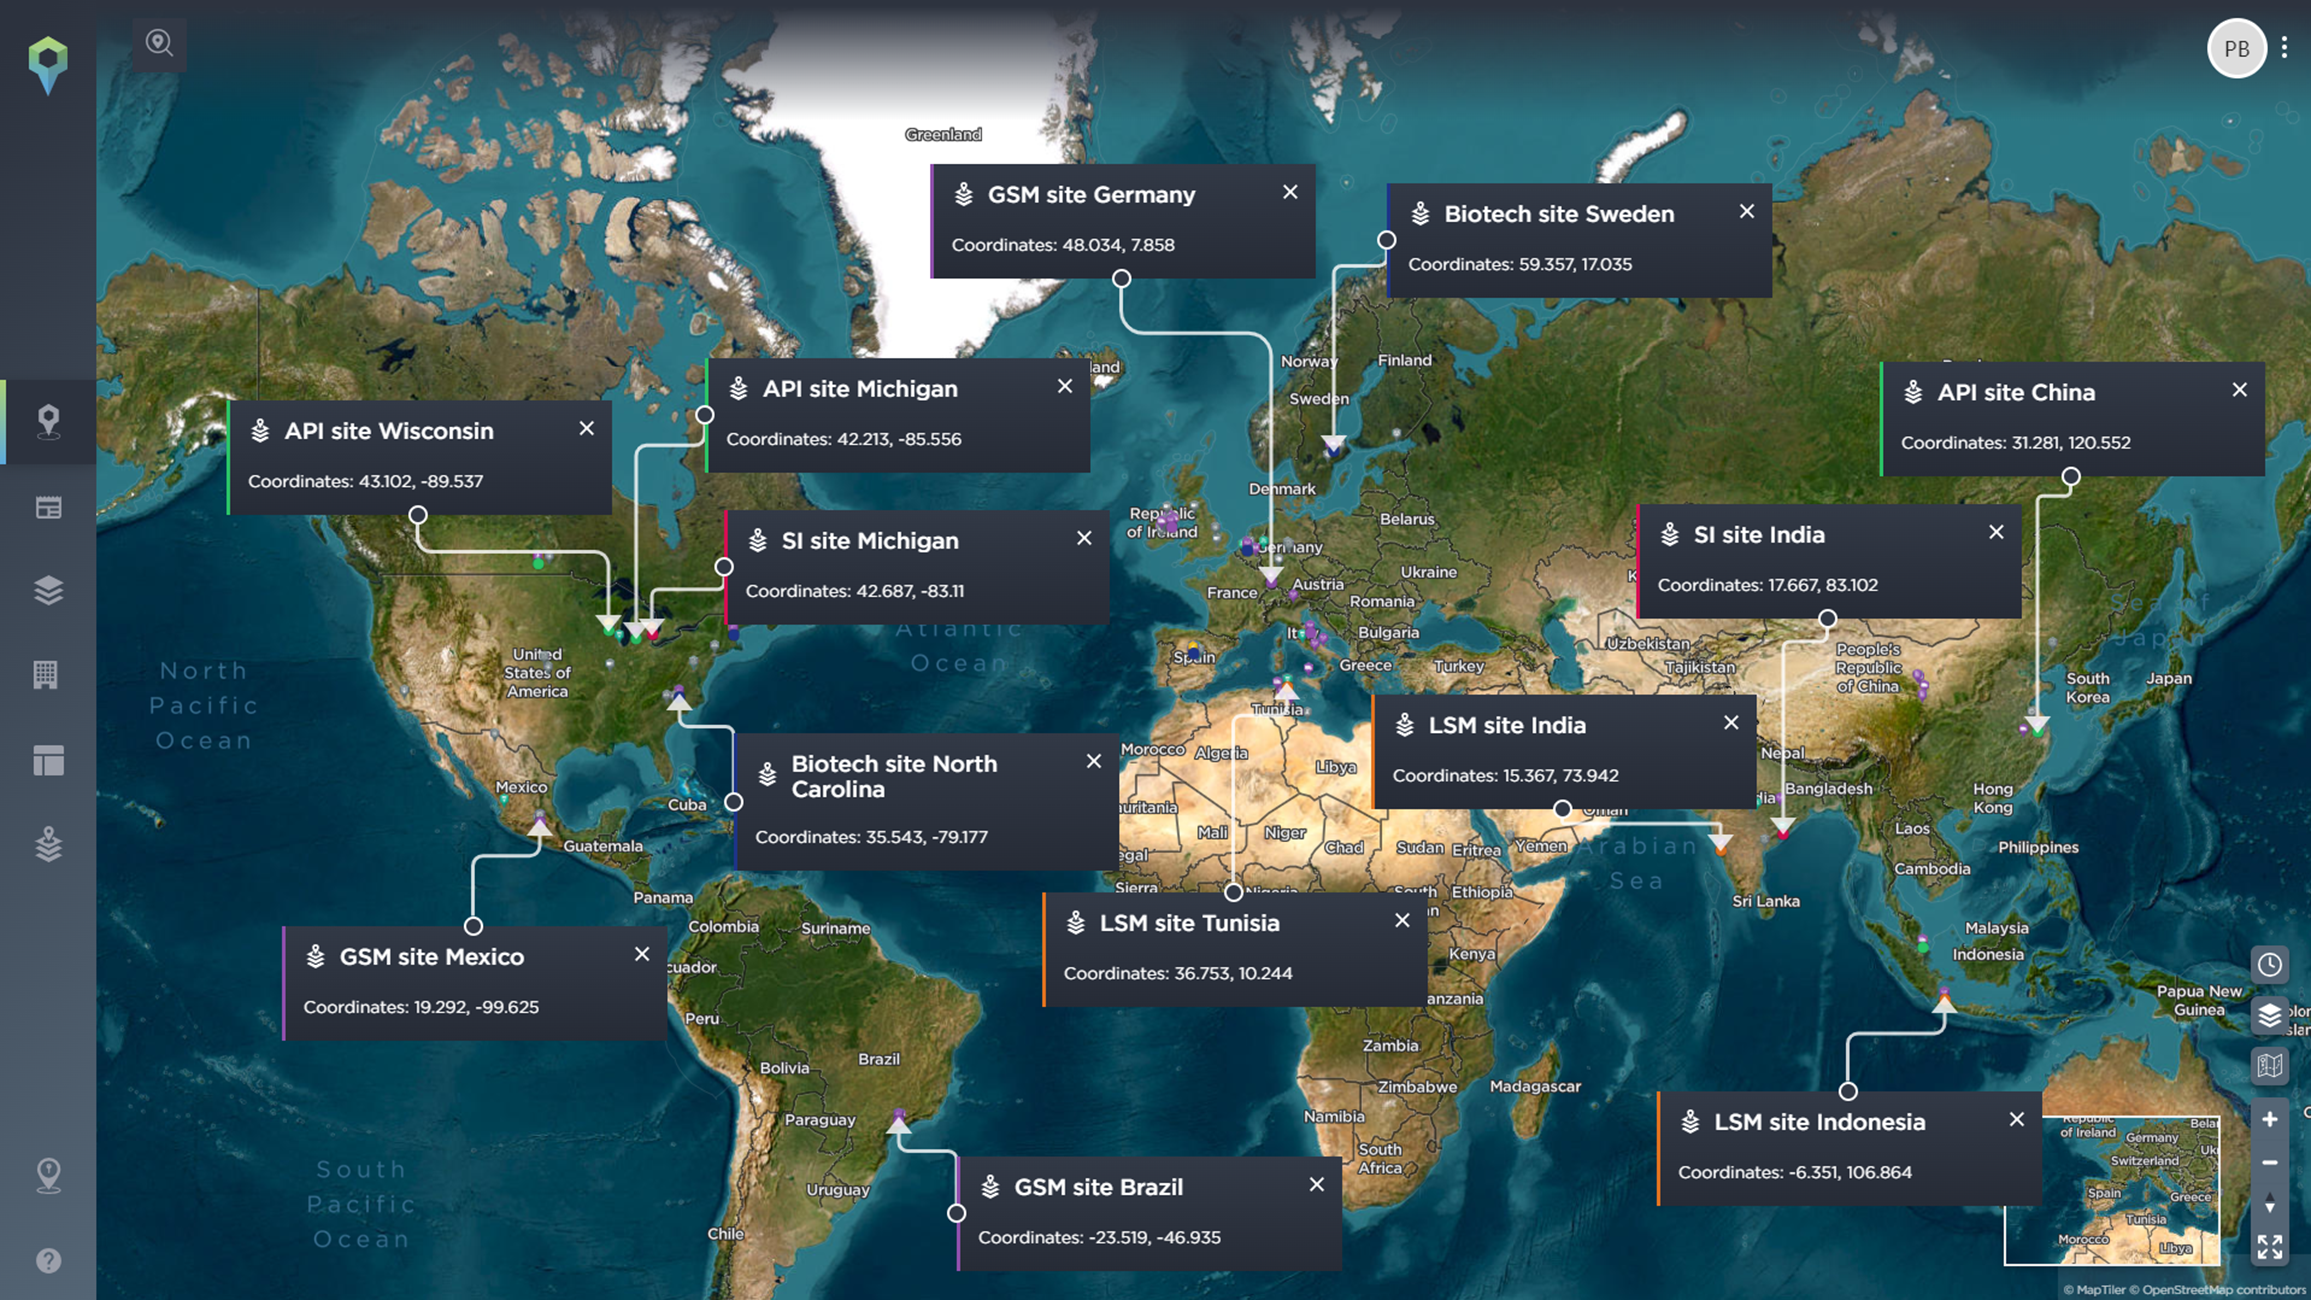 Examples of different pharmaceutical manufacturing sites across the globe for a single pharmaceutical company’s supply chain, mapped using the static assets feature on the Intelligence Fusion platform